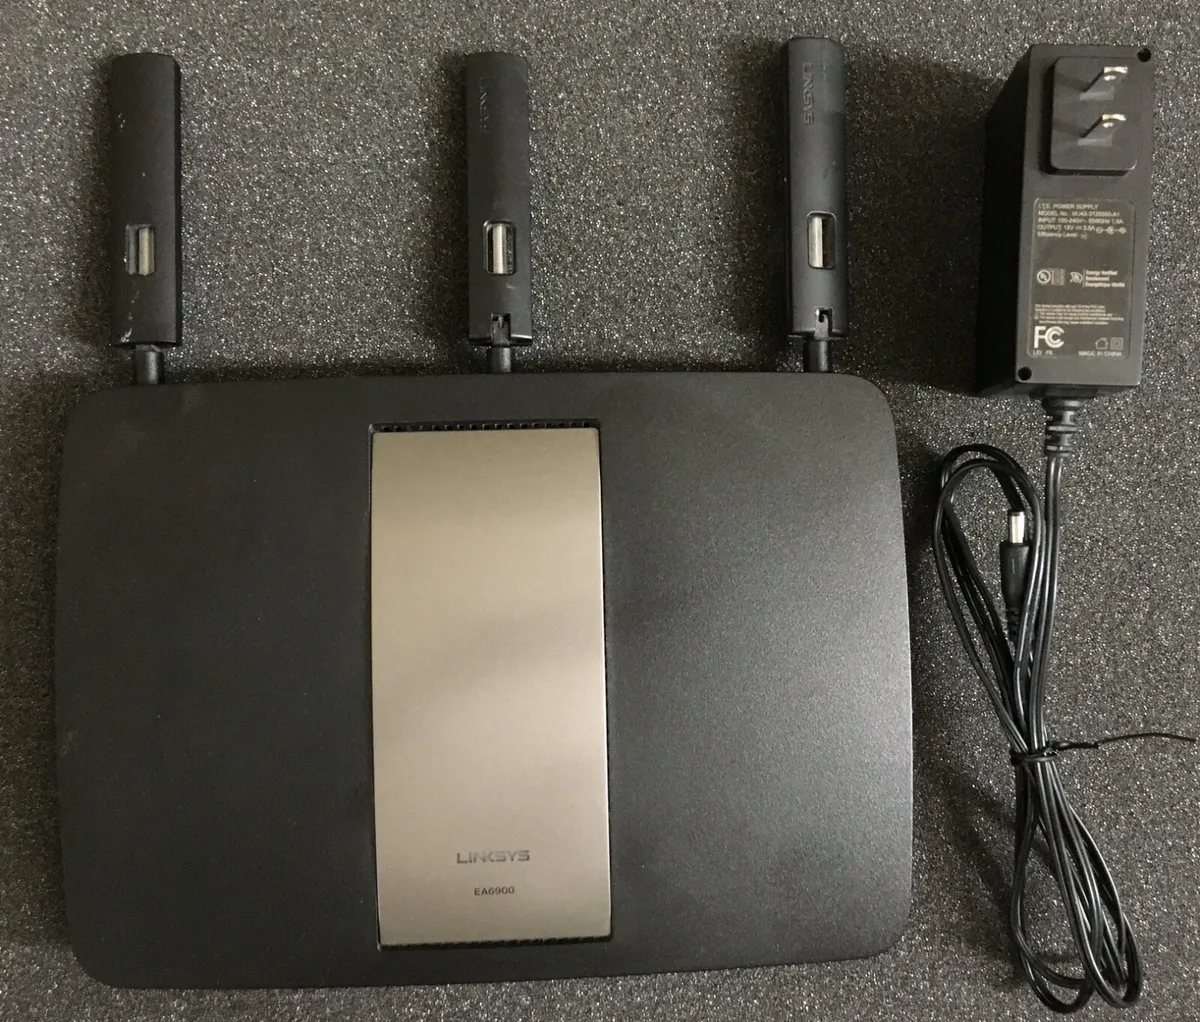 Used - - Working - Linksys EA6900 AC1900 V1.1 Router | eBay